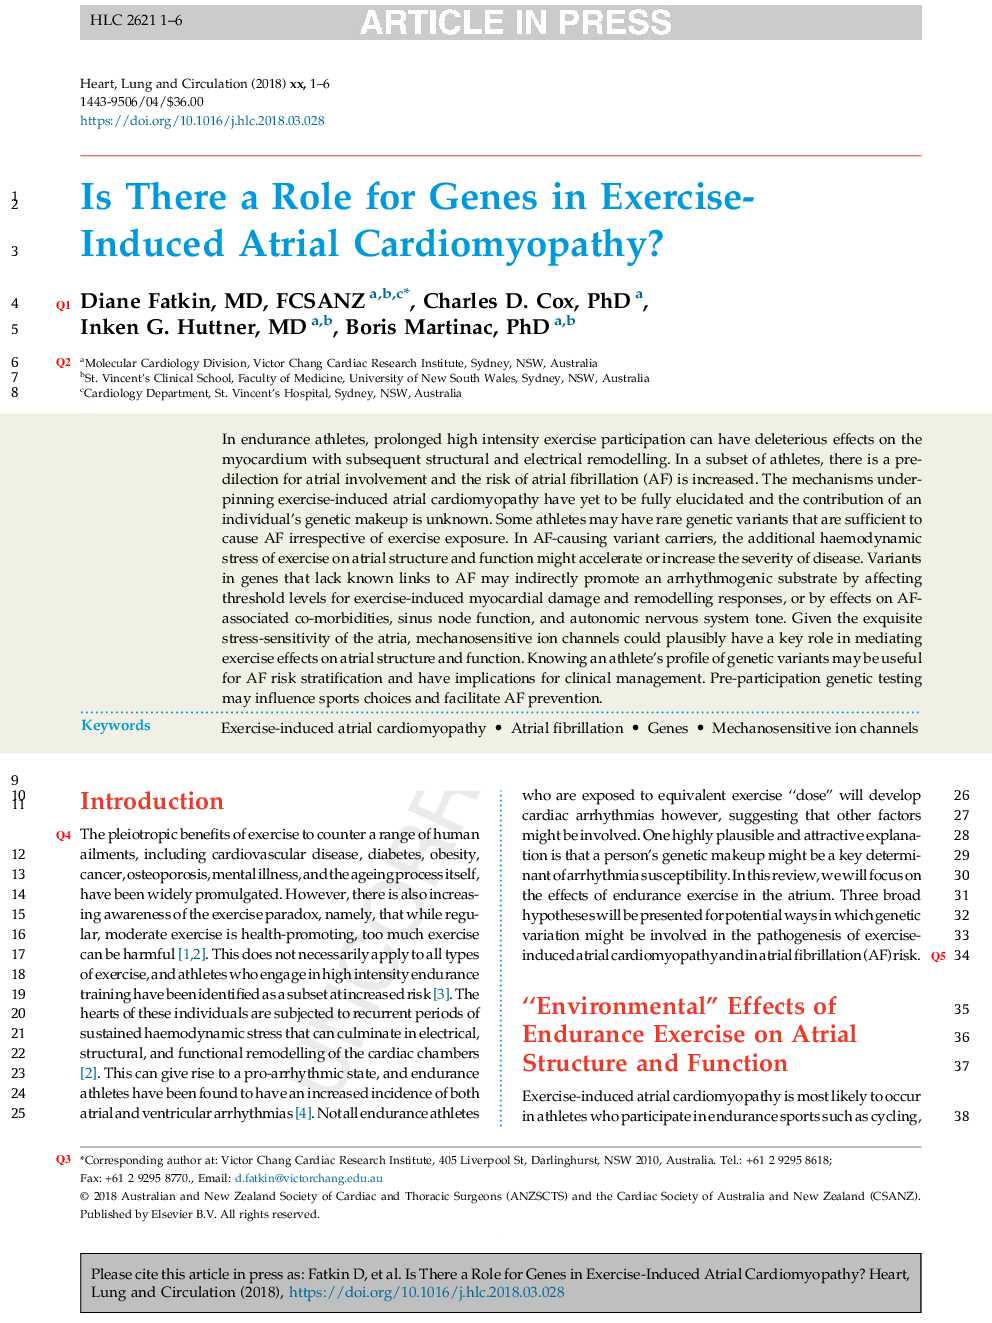 Is There a Role for Genes in Exercise-Induced Atrial Cardiomyopathy?